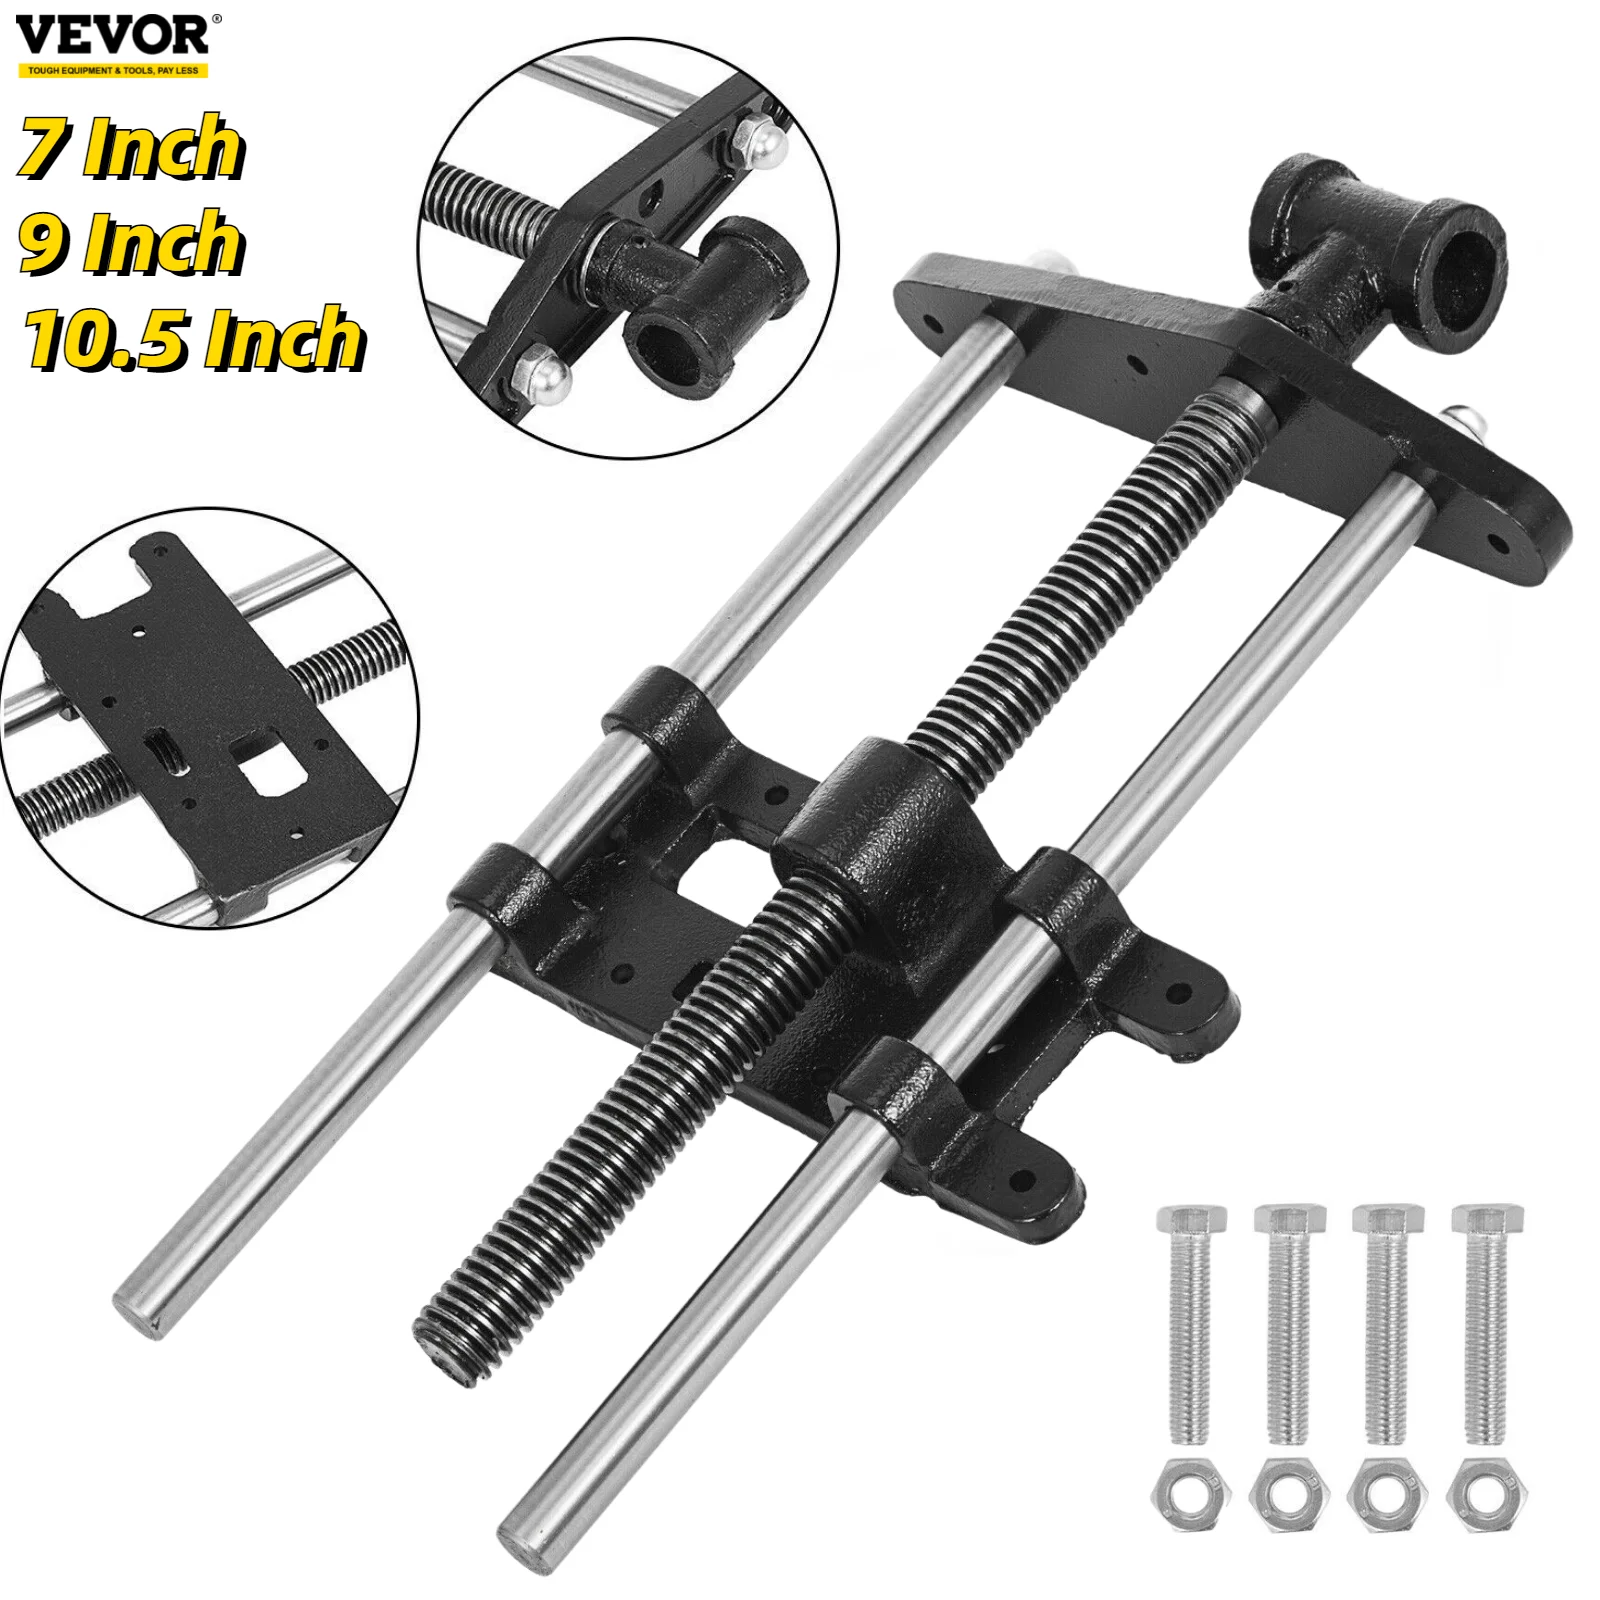 

VEVOR 7in 9in 10.5in Woodworking Vise Fixed Repair Vice Tool Heavy Duty Bench Clamp Cast Iron Wood Work Table Clamping Vises